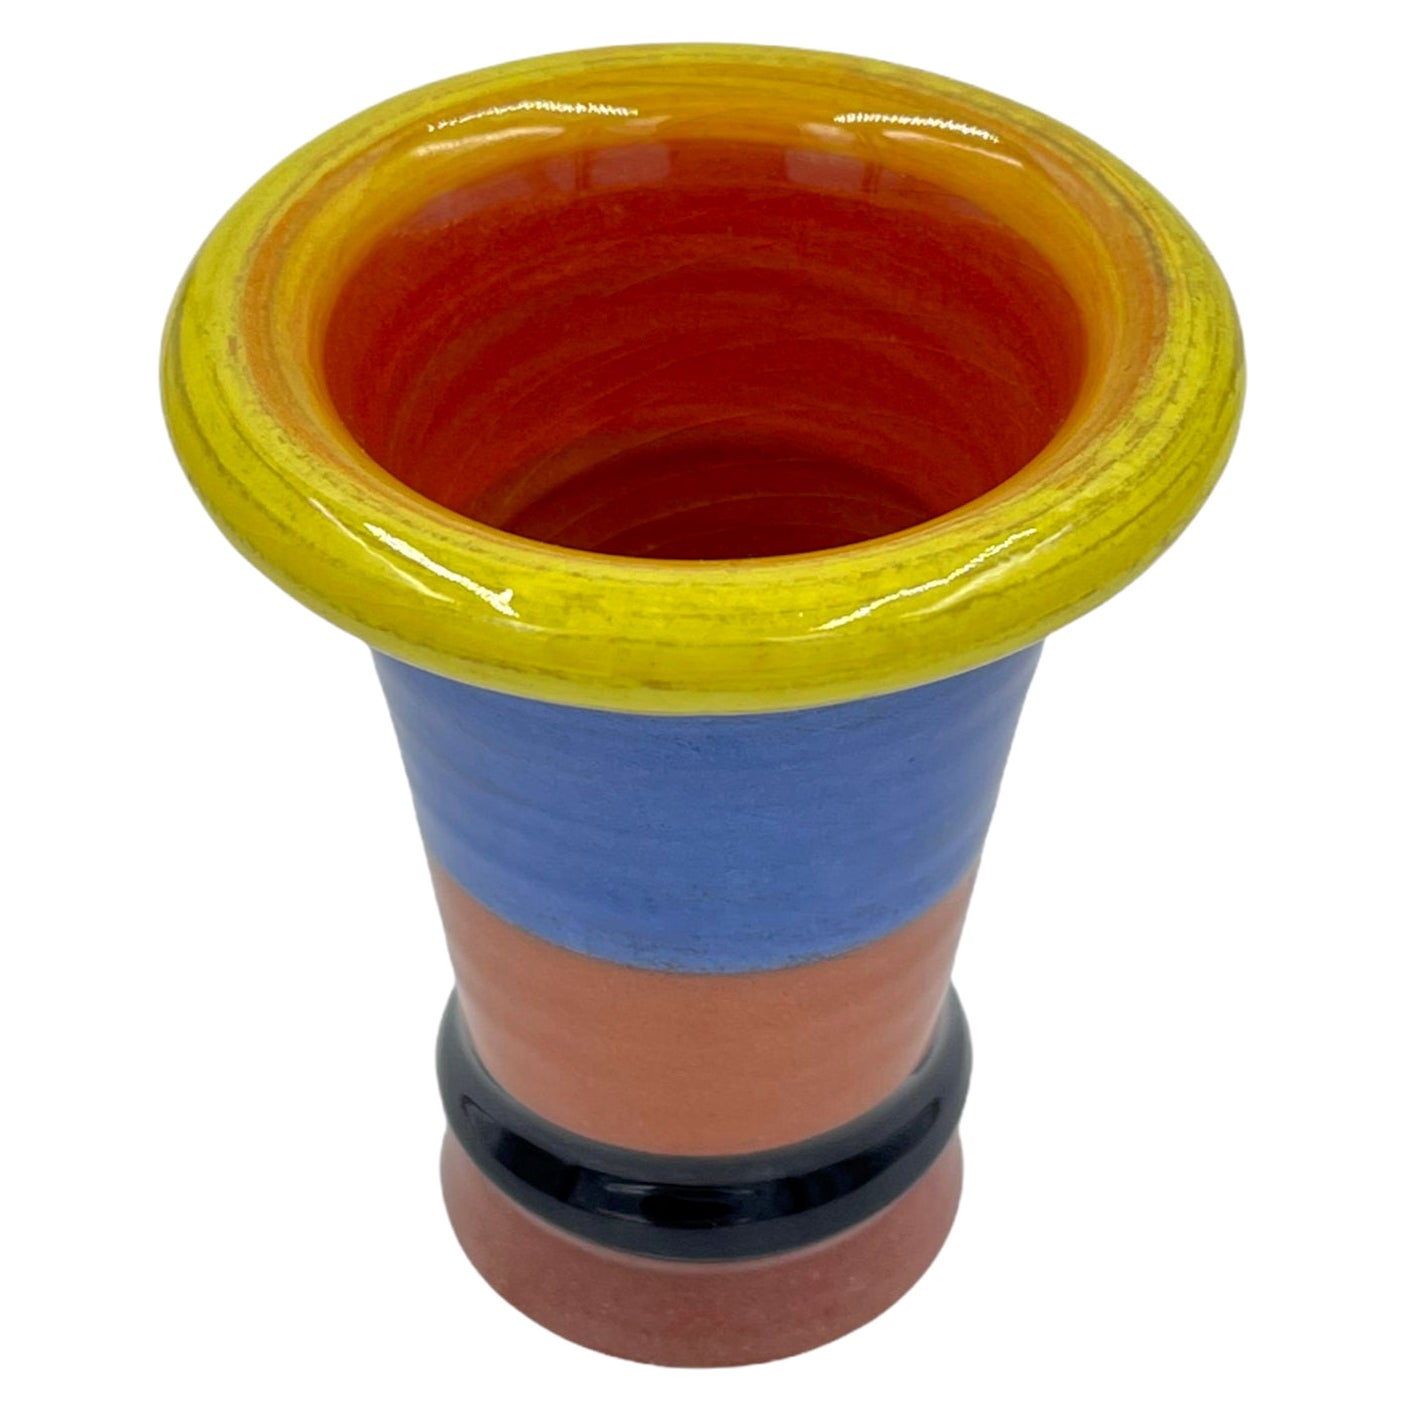 Peter Shire Expo Vase, 1980 For Sale